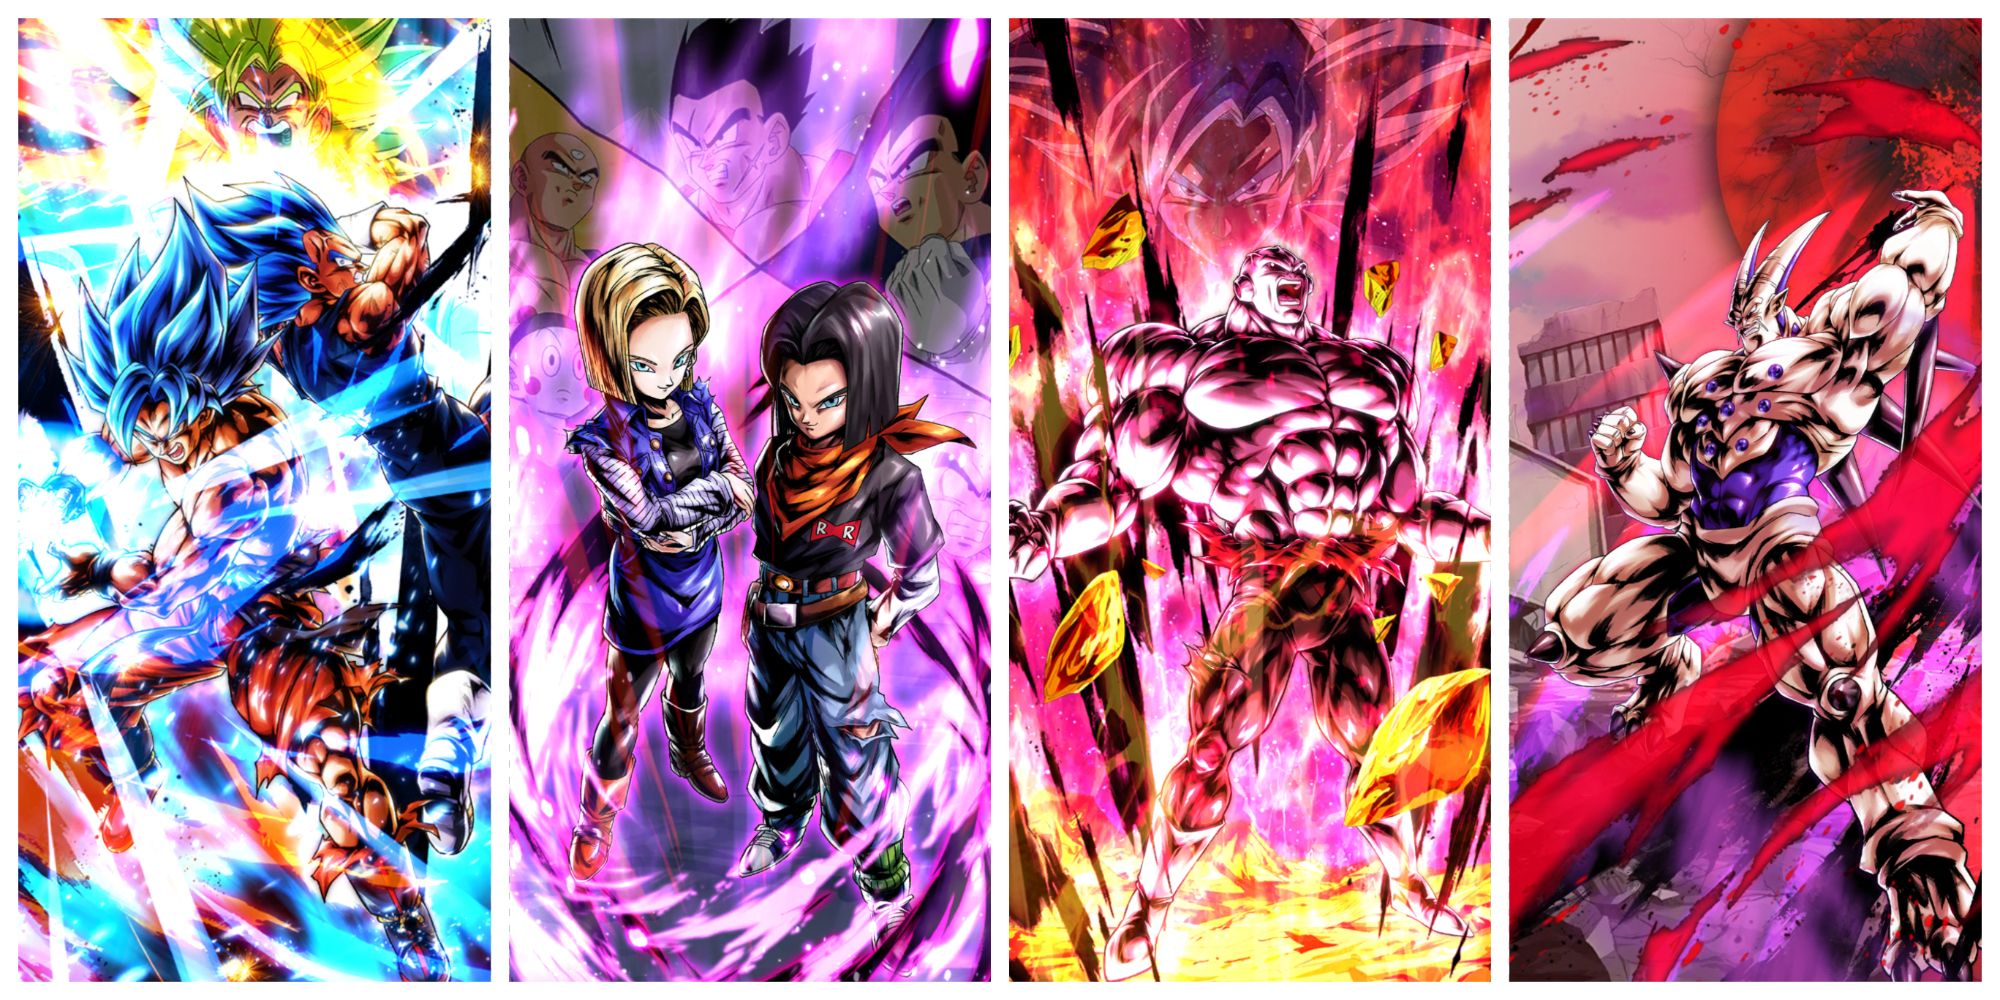 An assortment of characters from Dragon Ball Legends